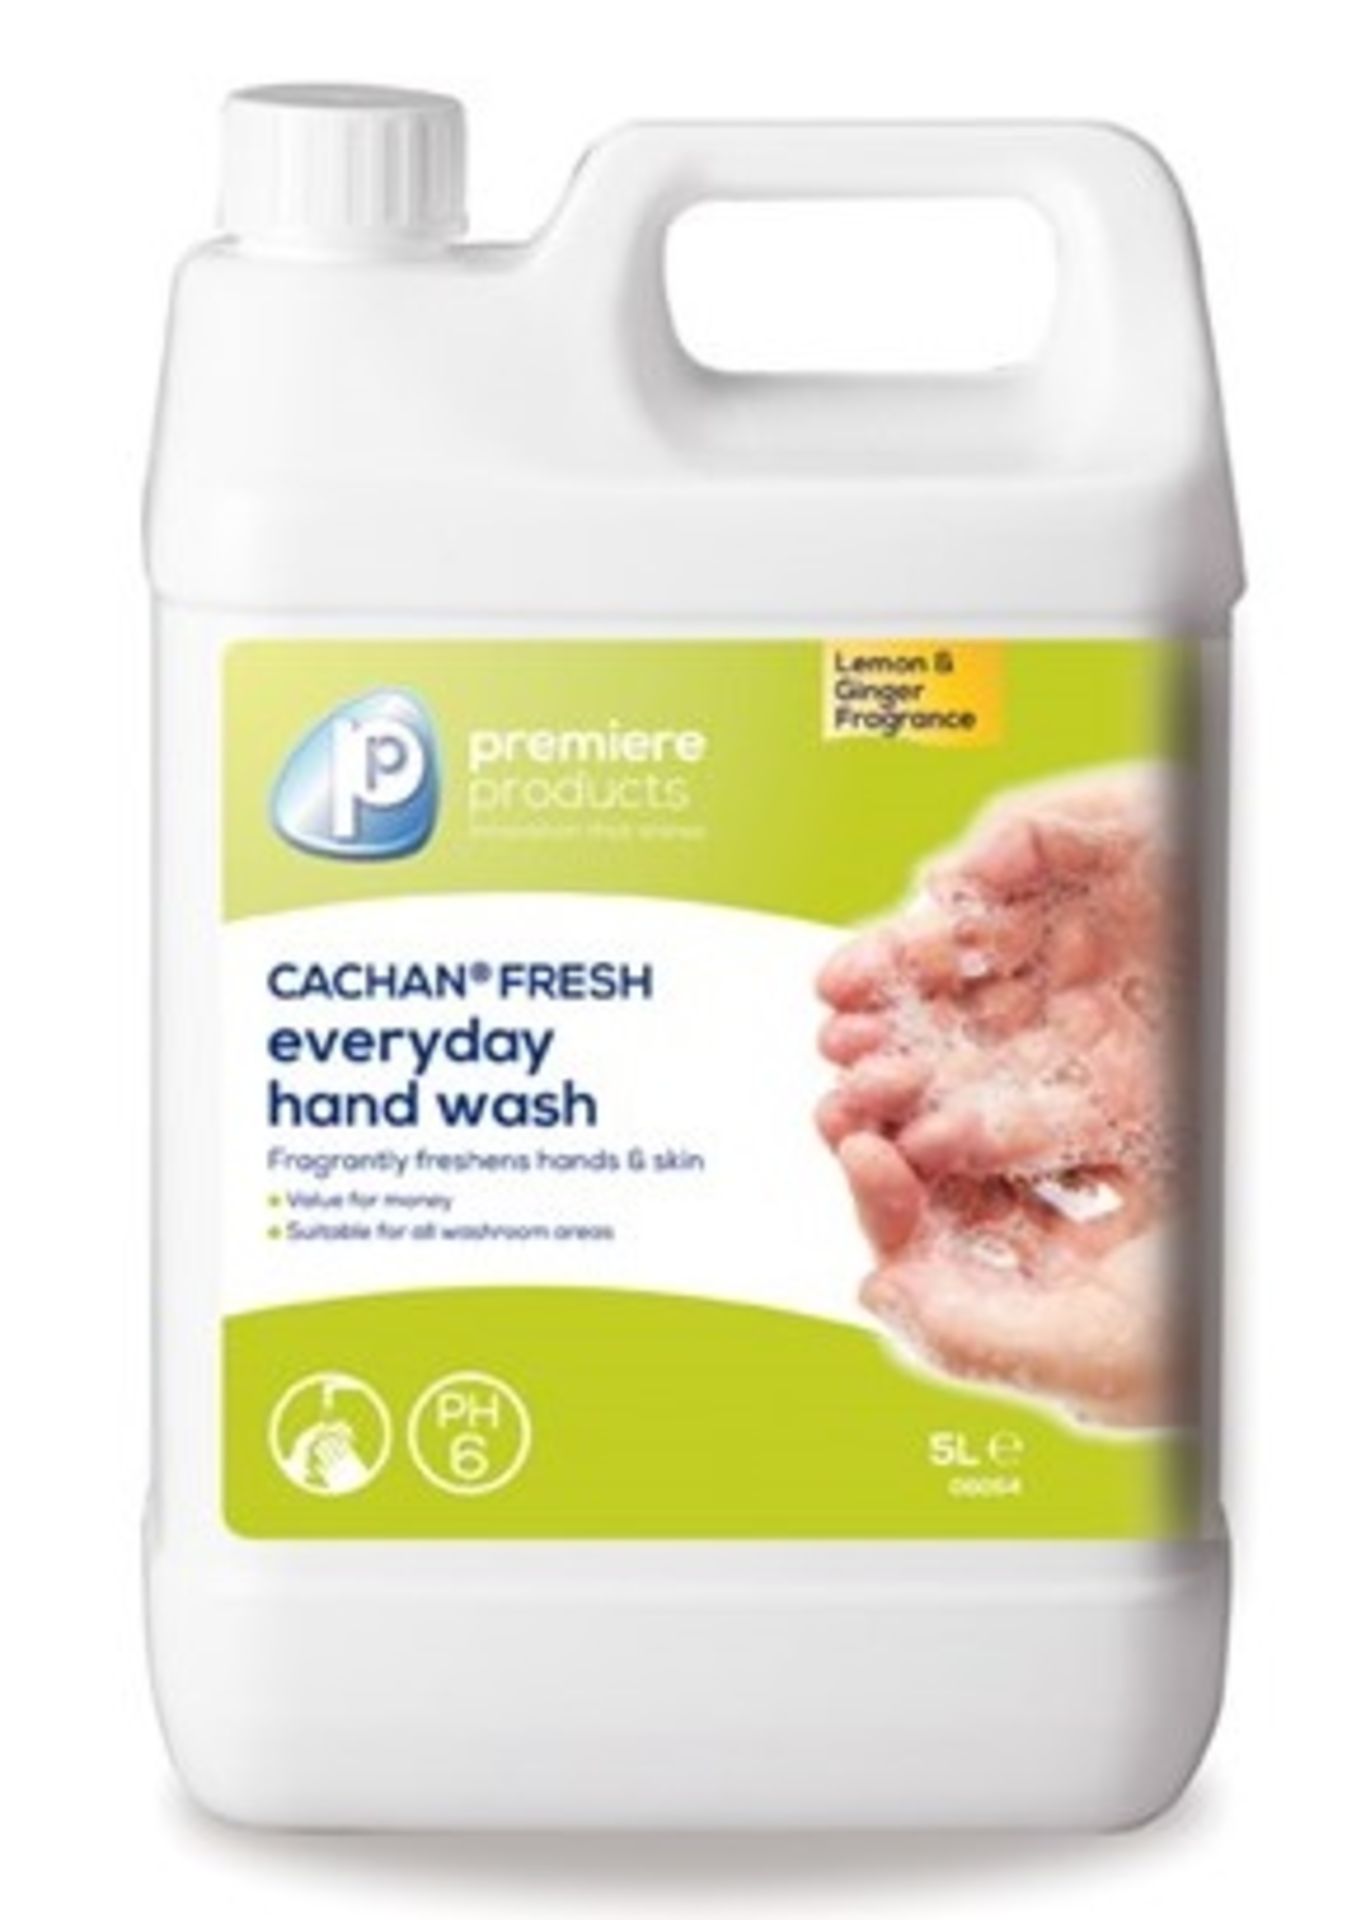 10 x Cachan Fresh 5 Litre Everyday Hand Wash - Premiere Products - Qulaity Everyday Hand Wash -